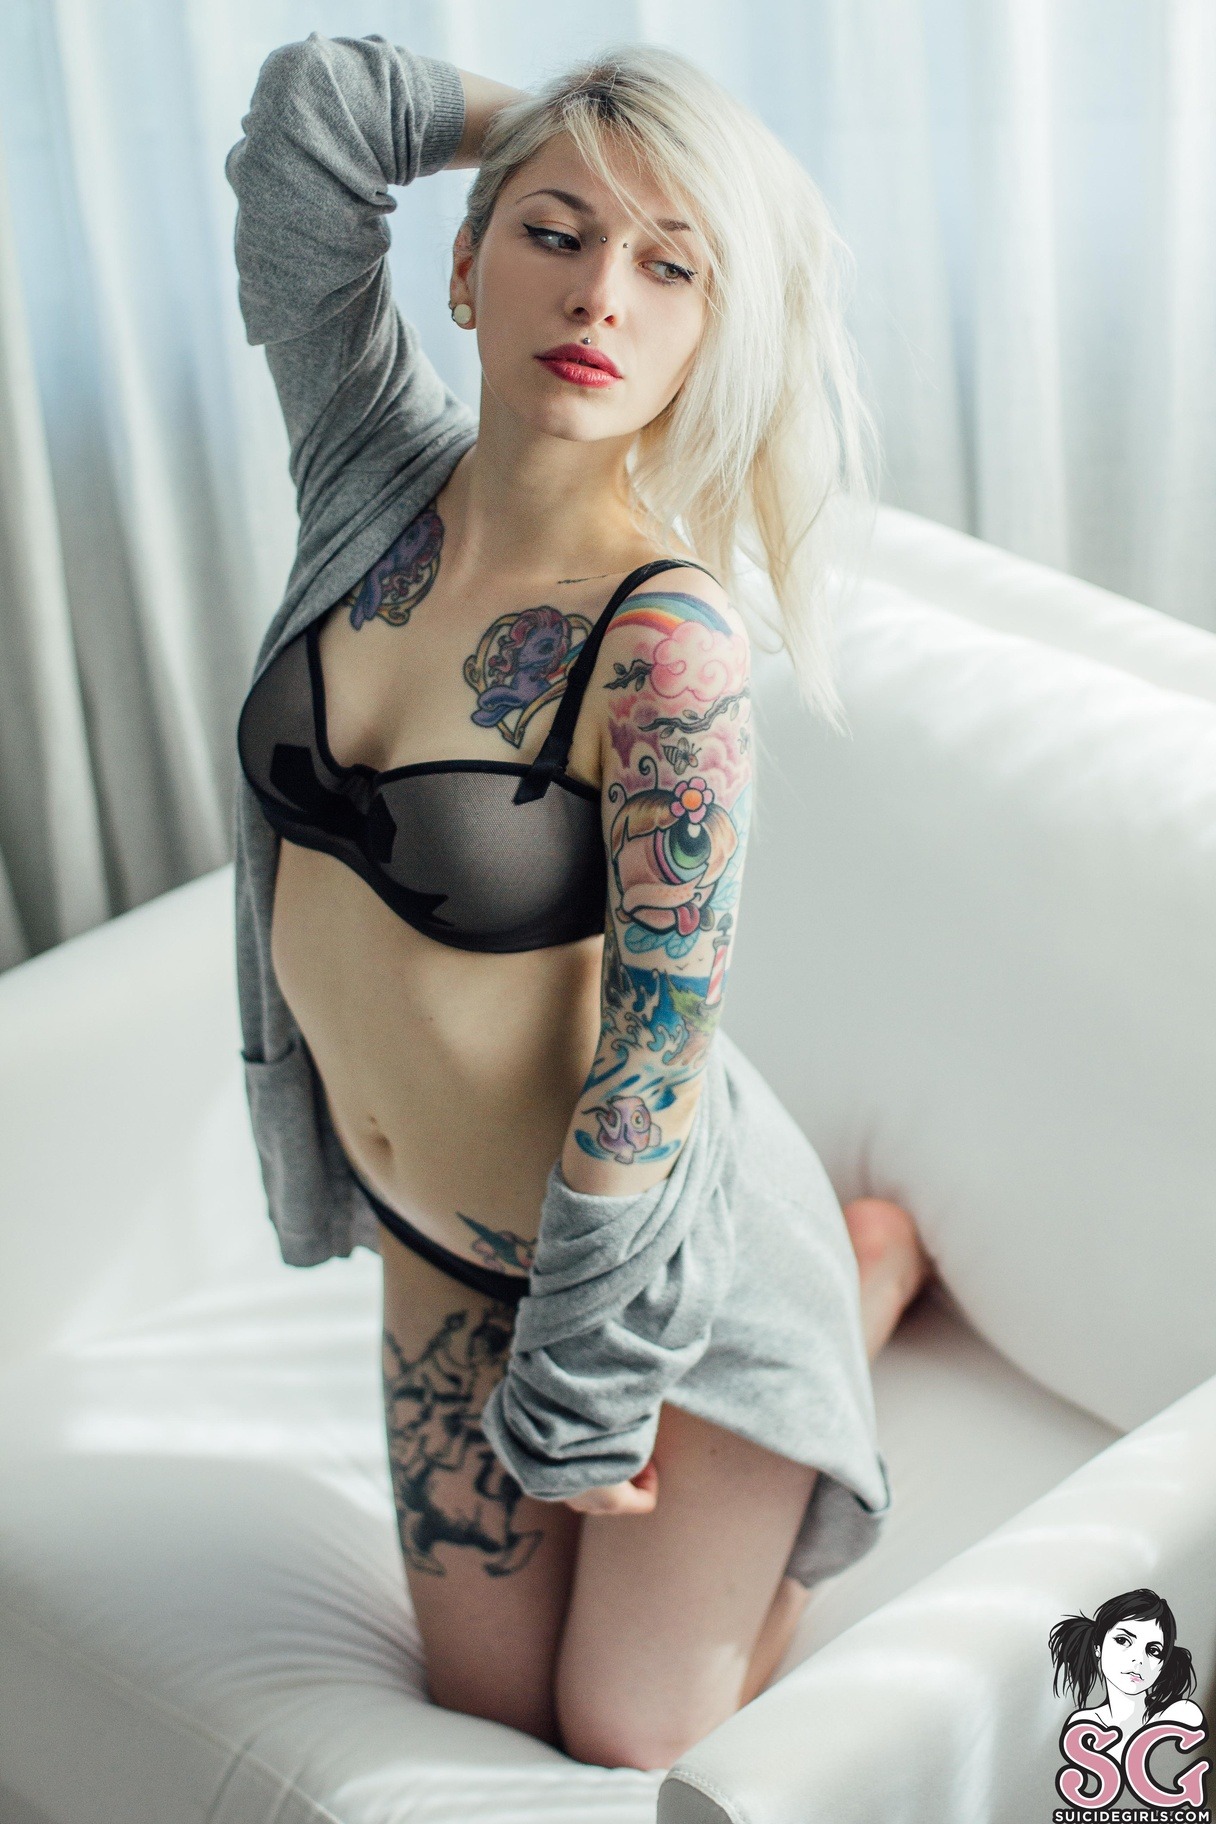 This Beauty made me so proud to be French ! ^^ &lt;3SuicideGirls.com : Marlene